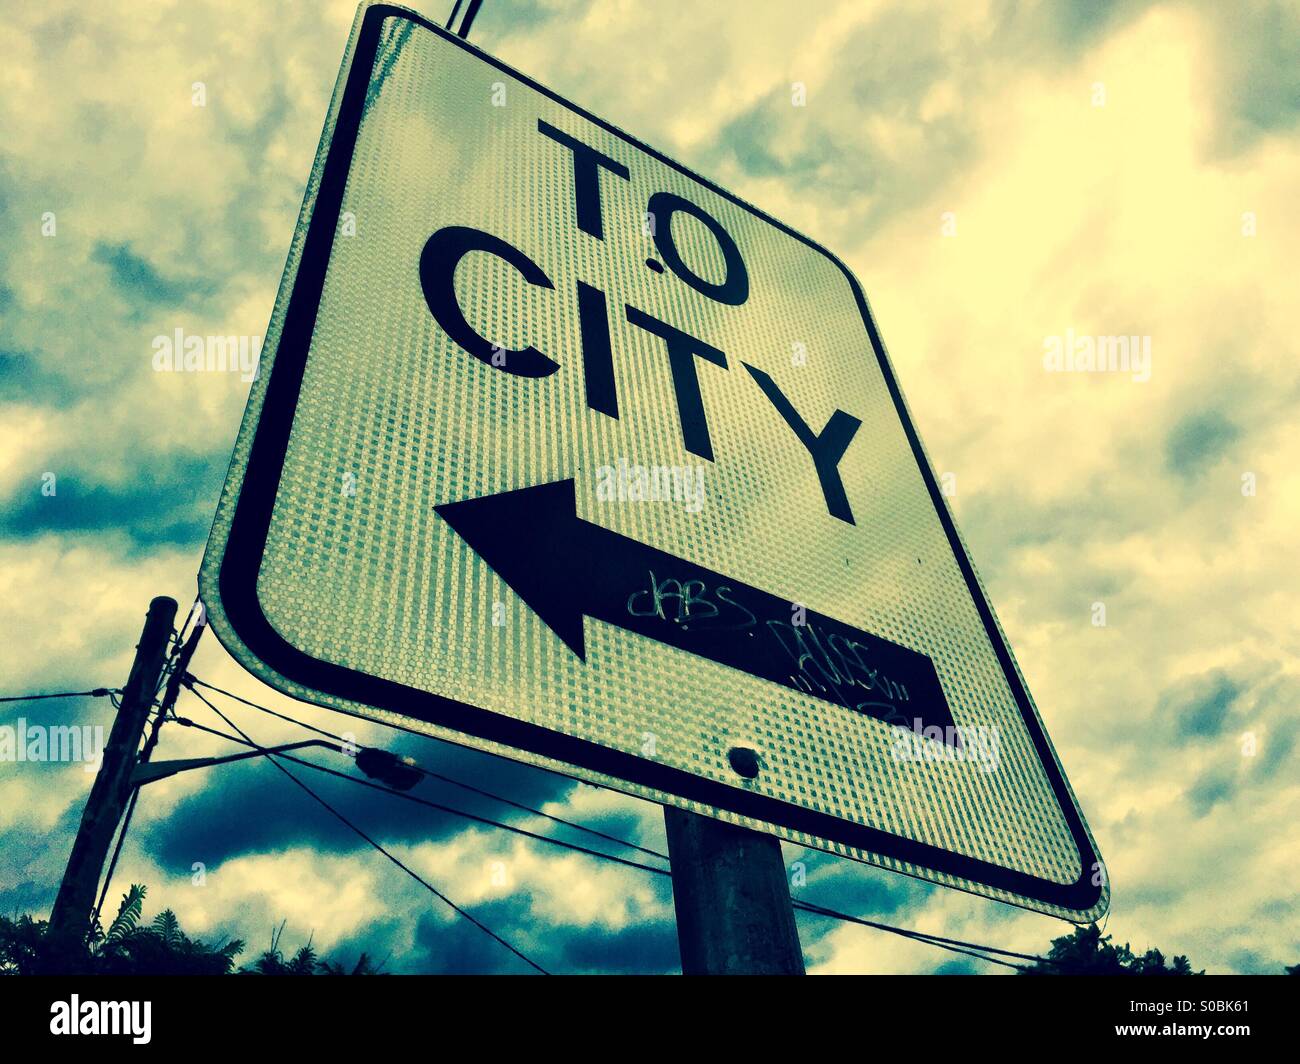 A sign that says 'To City' Stock Photo